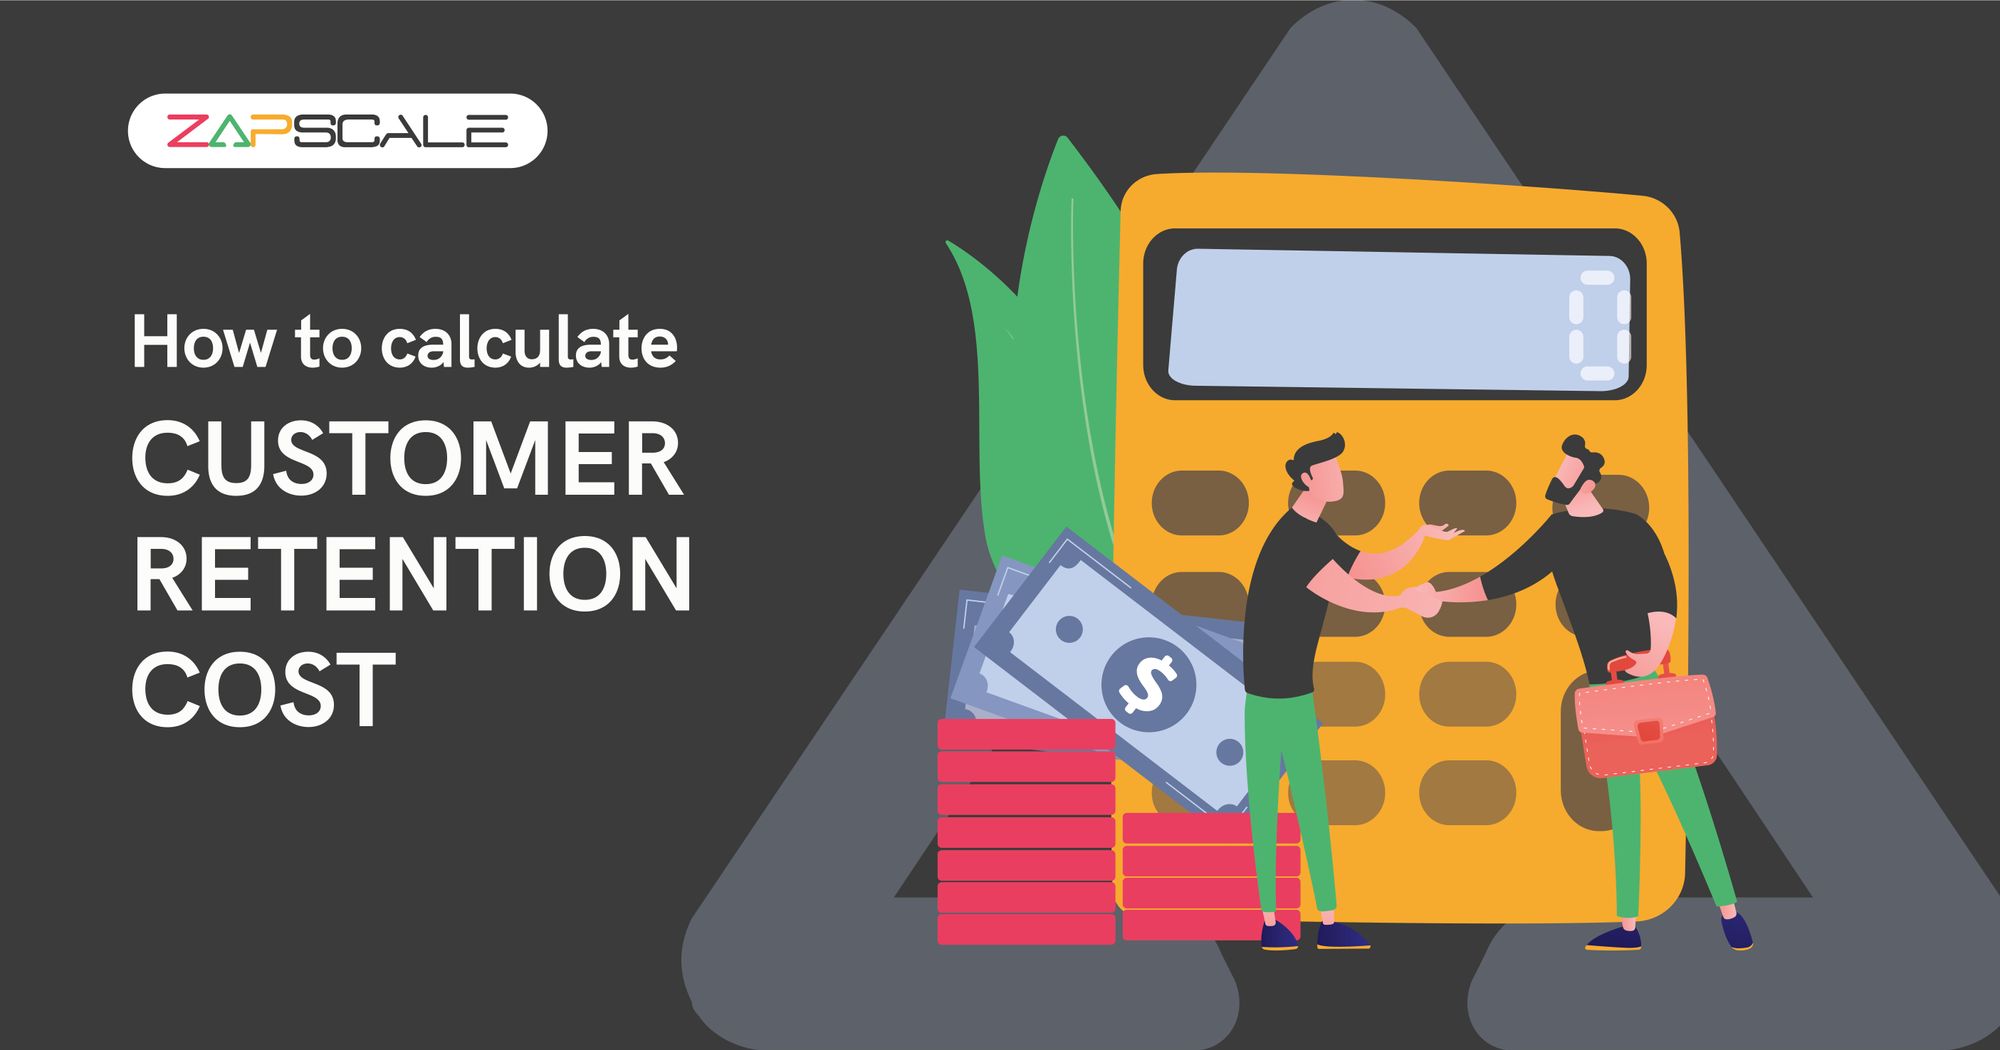 Customer Retention Cost: How to Reduce CRC and Drive Growth